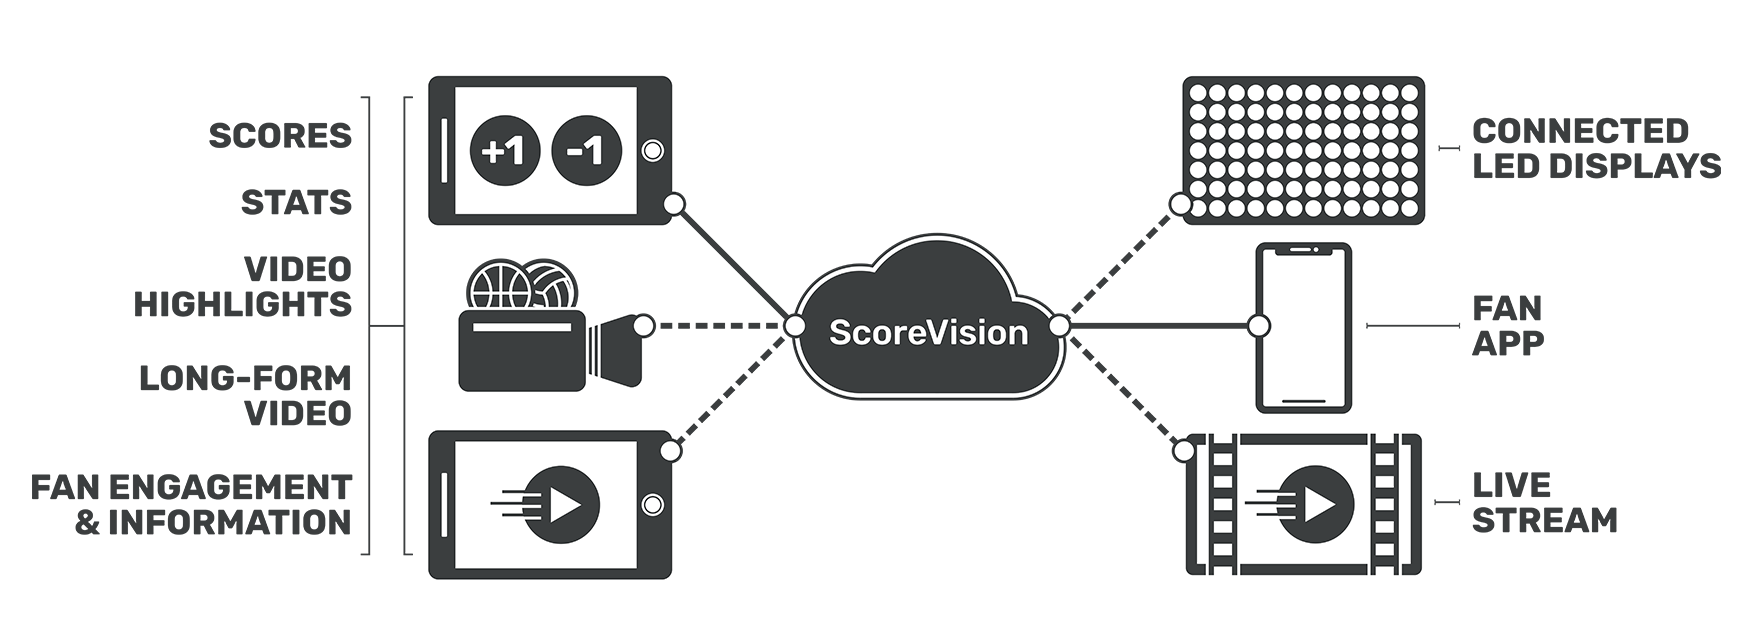 ScoreVision Streaming Software - How it Works